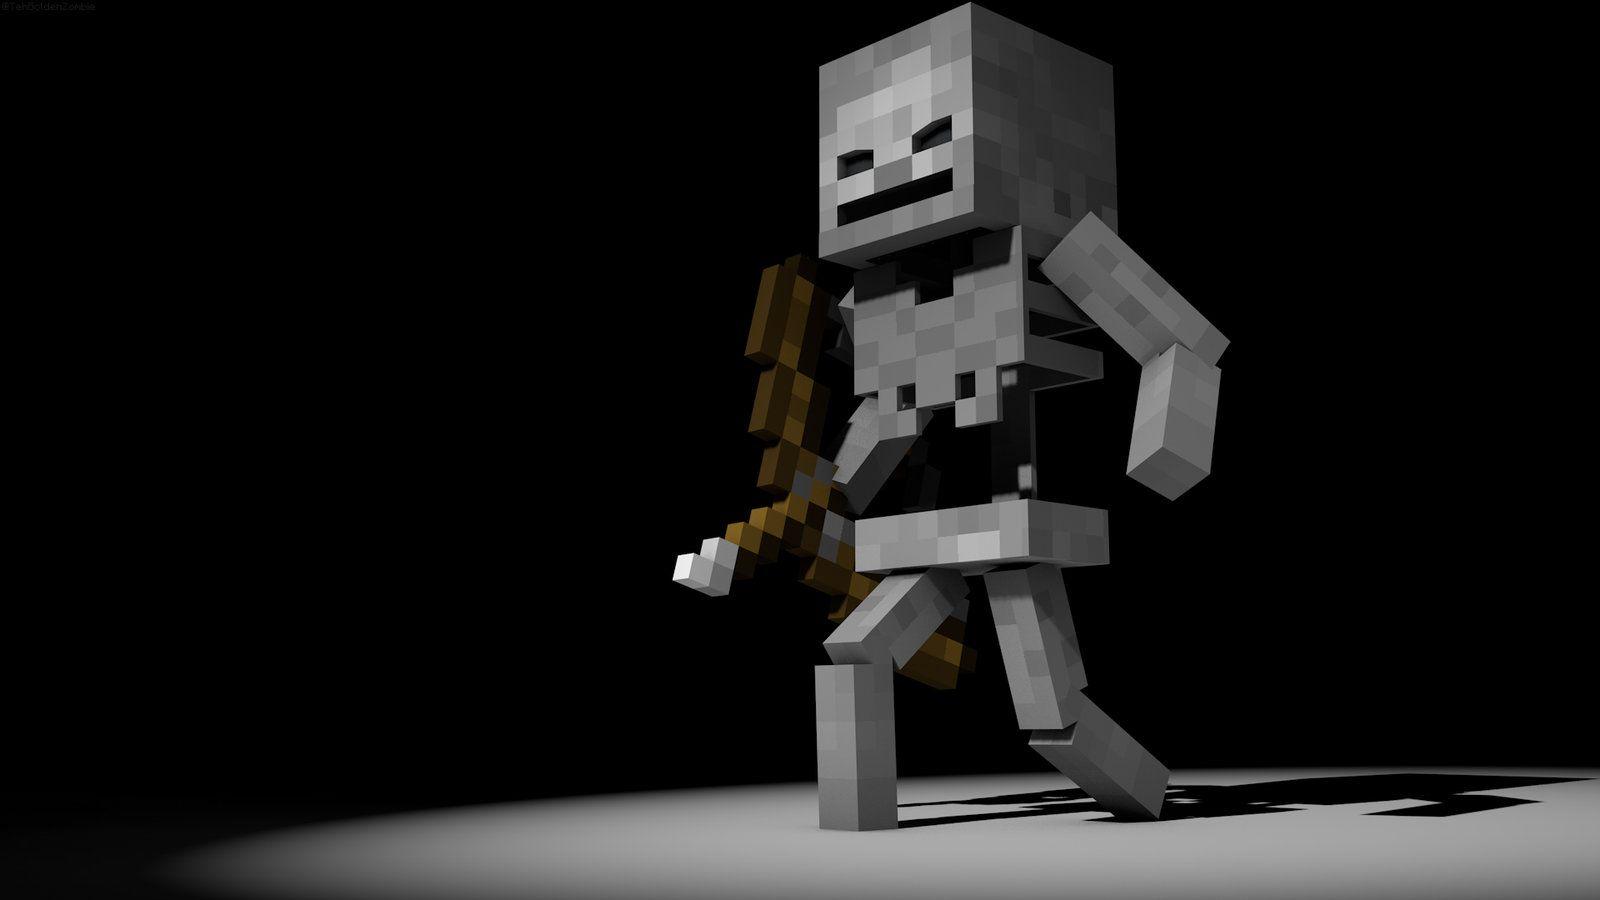 Minecraft Wallpaper Wither Skeleton, PC Minecraft Wallpaper Wither